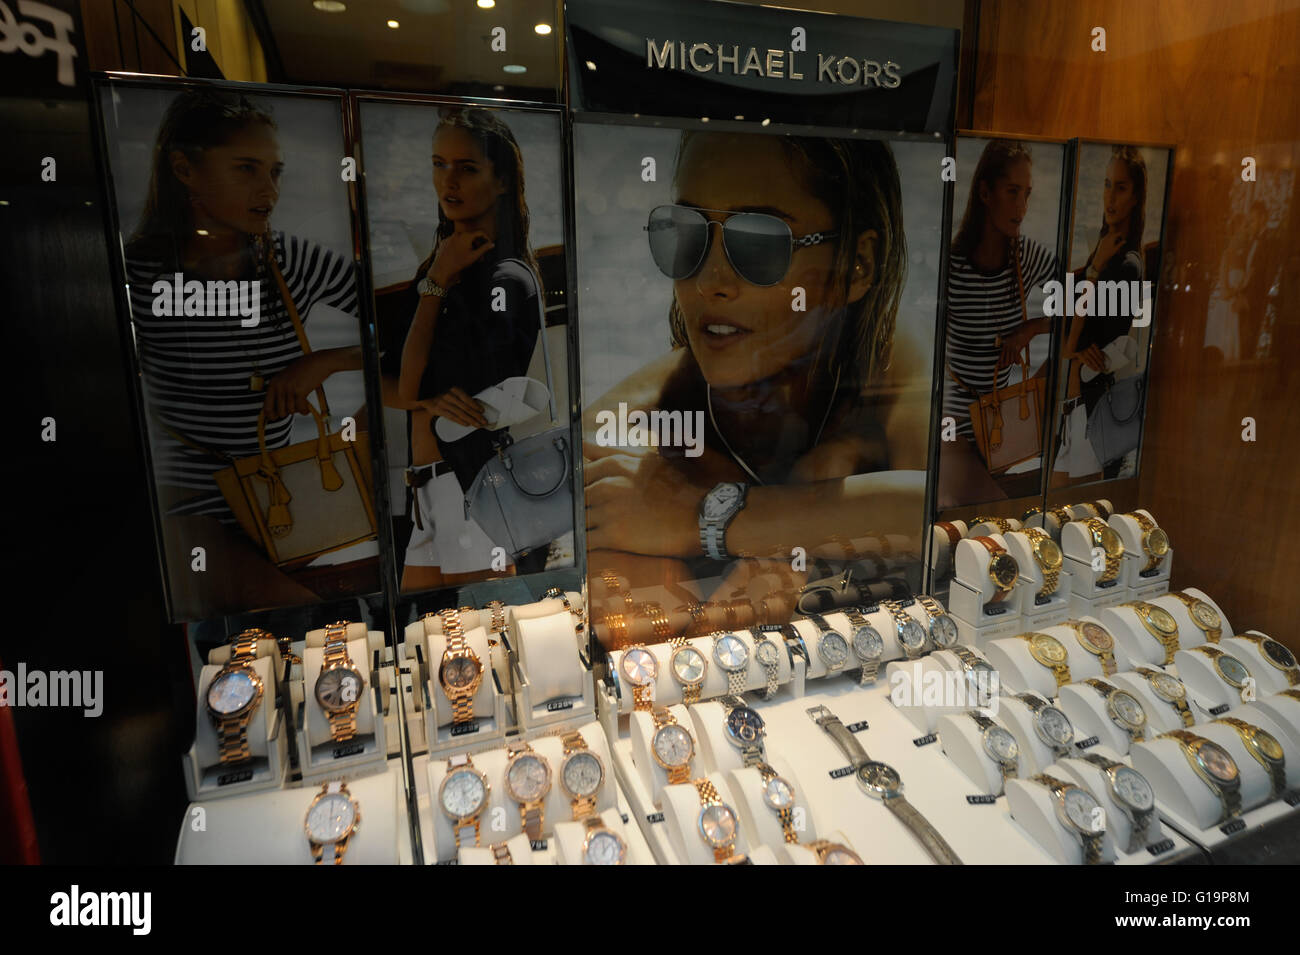 Micheal Kors watches on display Stock Photo